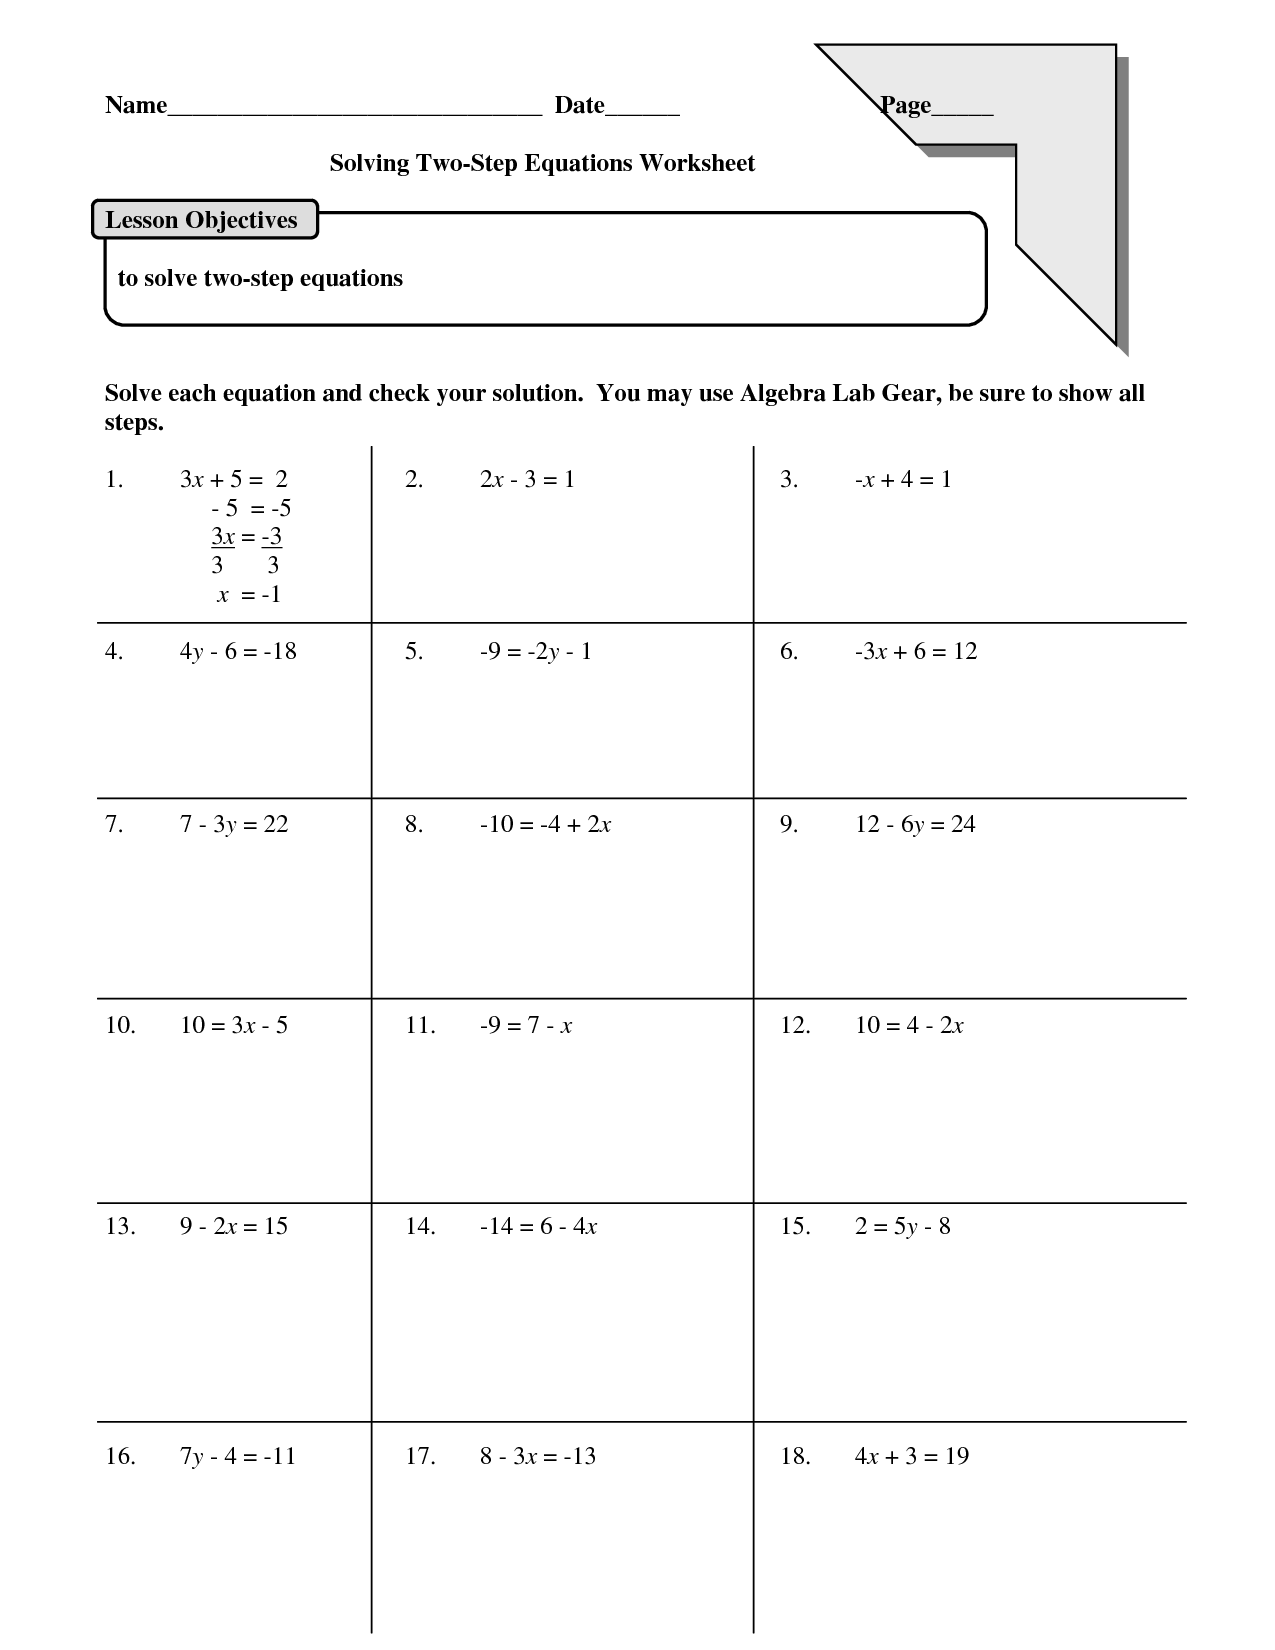 view-why-is-an-idea-like-the-pacific-math-worksheet-answers-gif-the-math